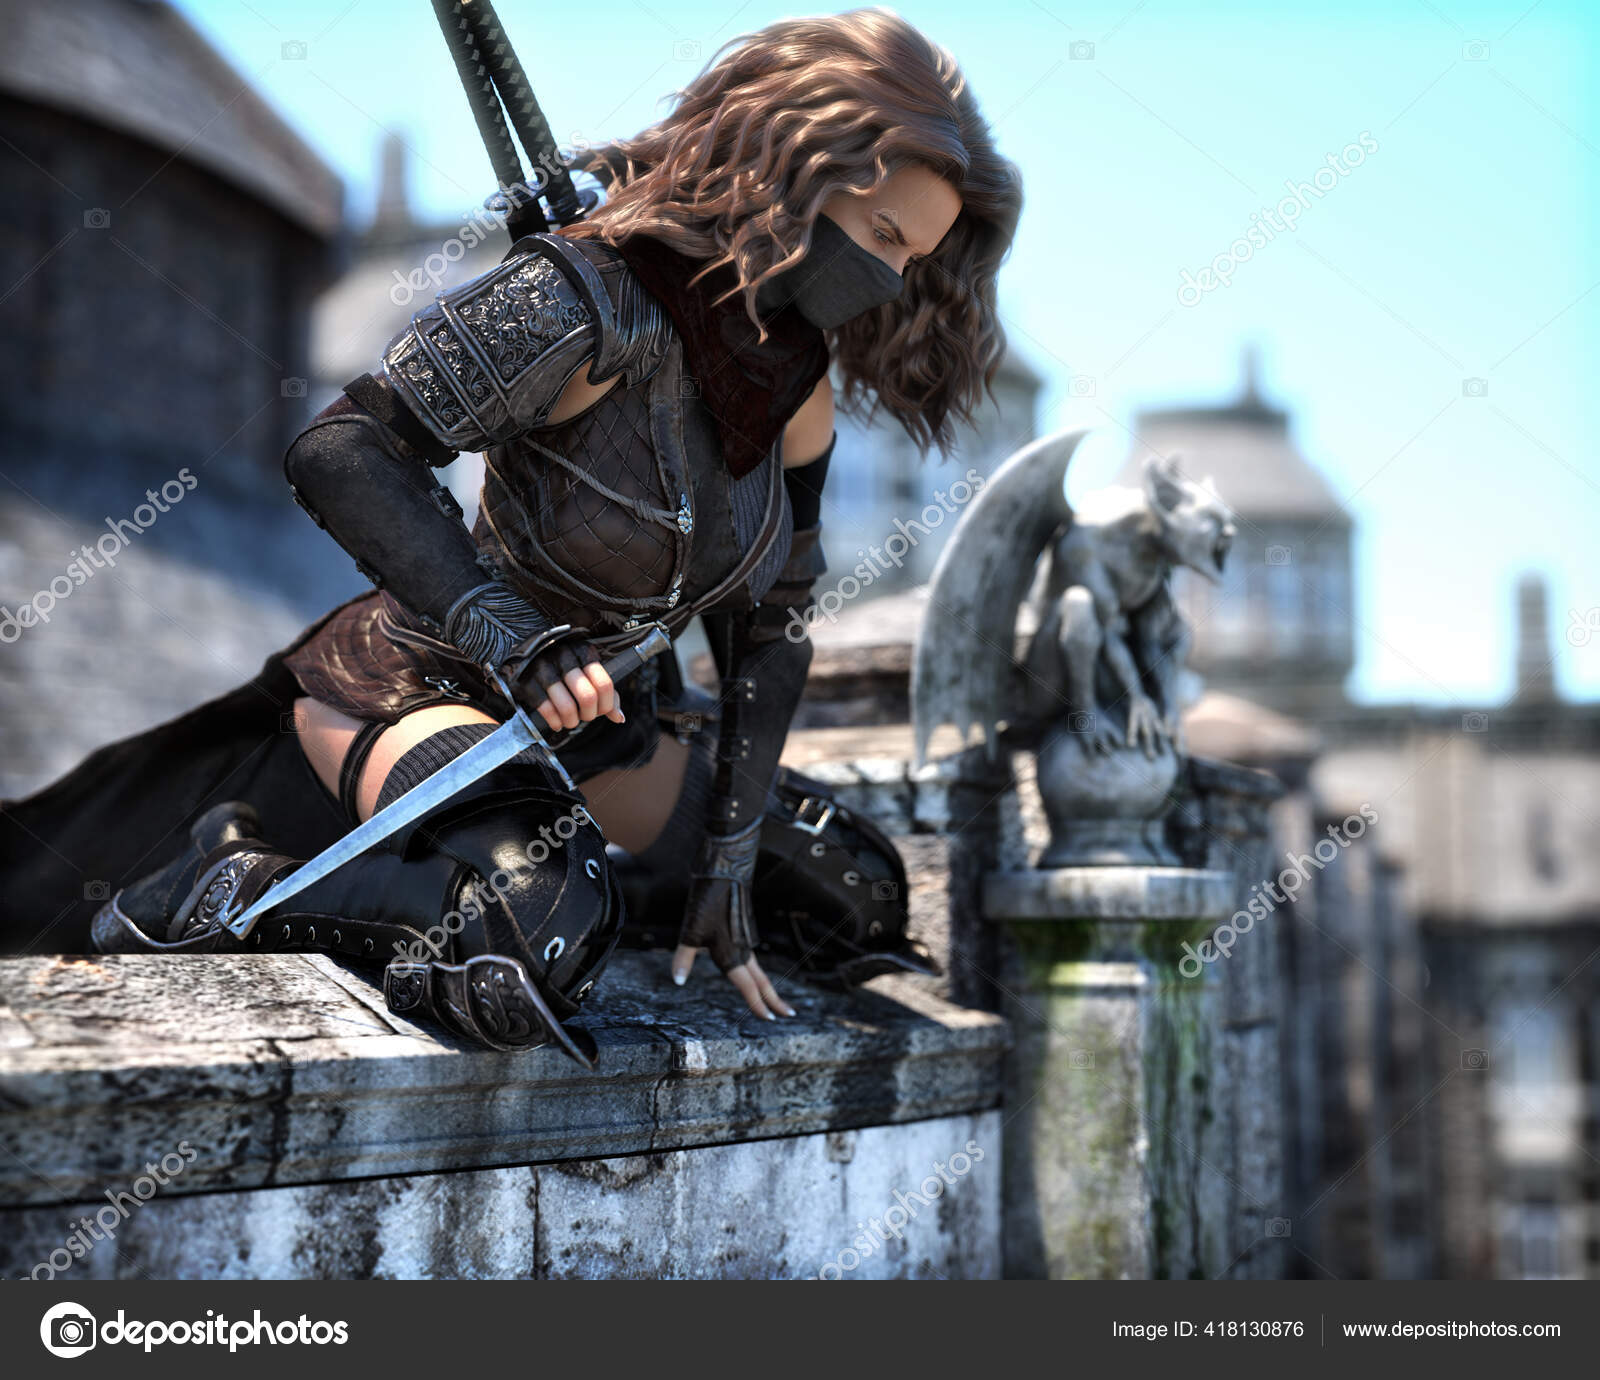 Mysterious Masked Rogue Assassin Female Position High Rooftops Looking Her Photo by ©digitalstorm 418130876